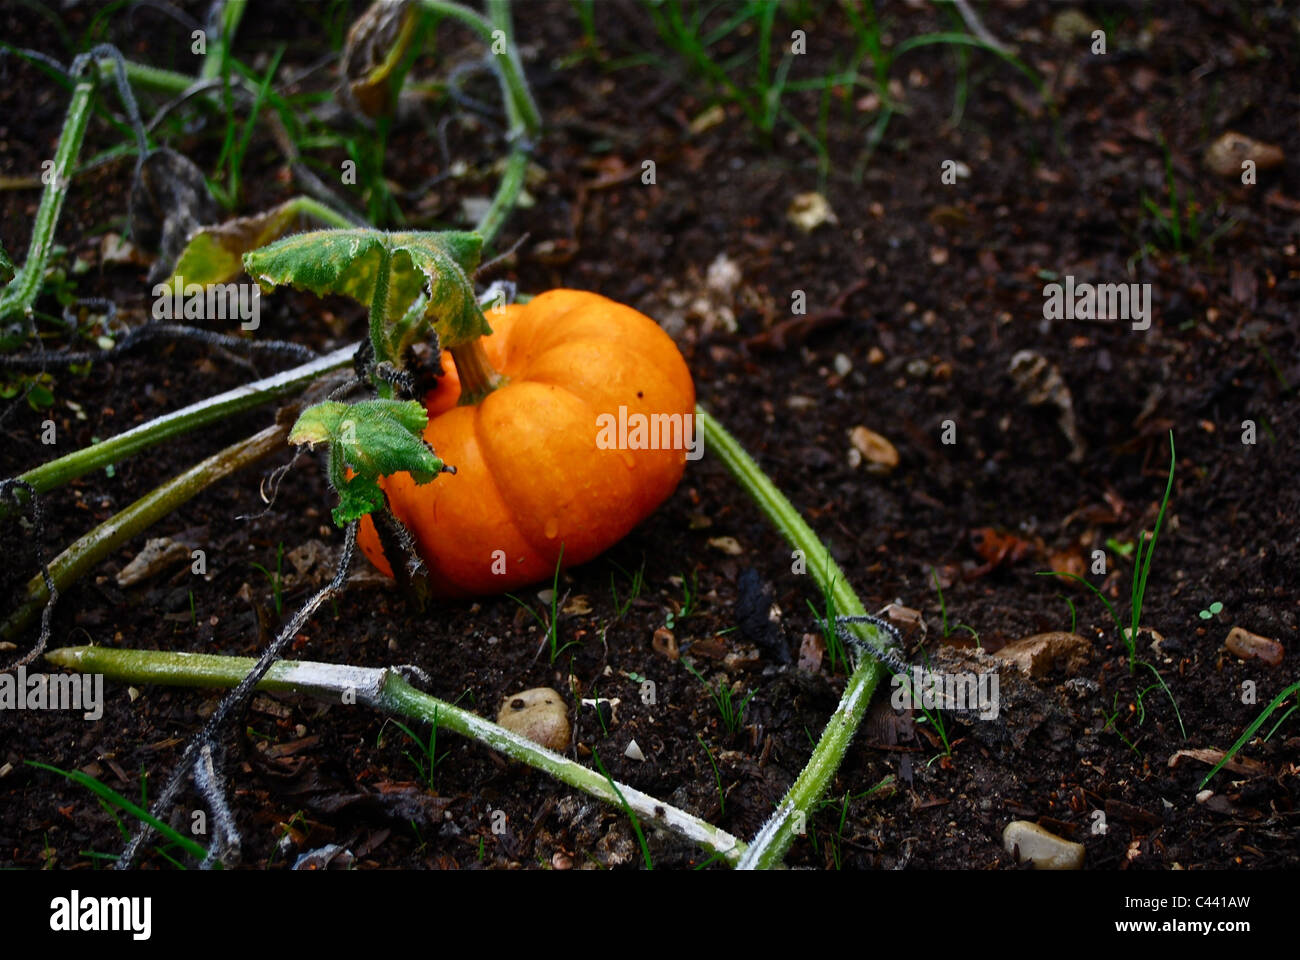 A small pumpkin growing surrounded by dirt and vines Stock Photo